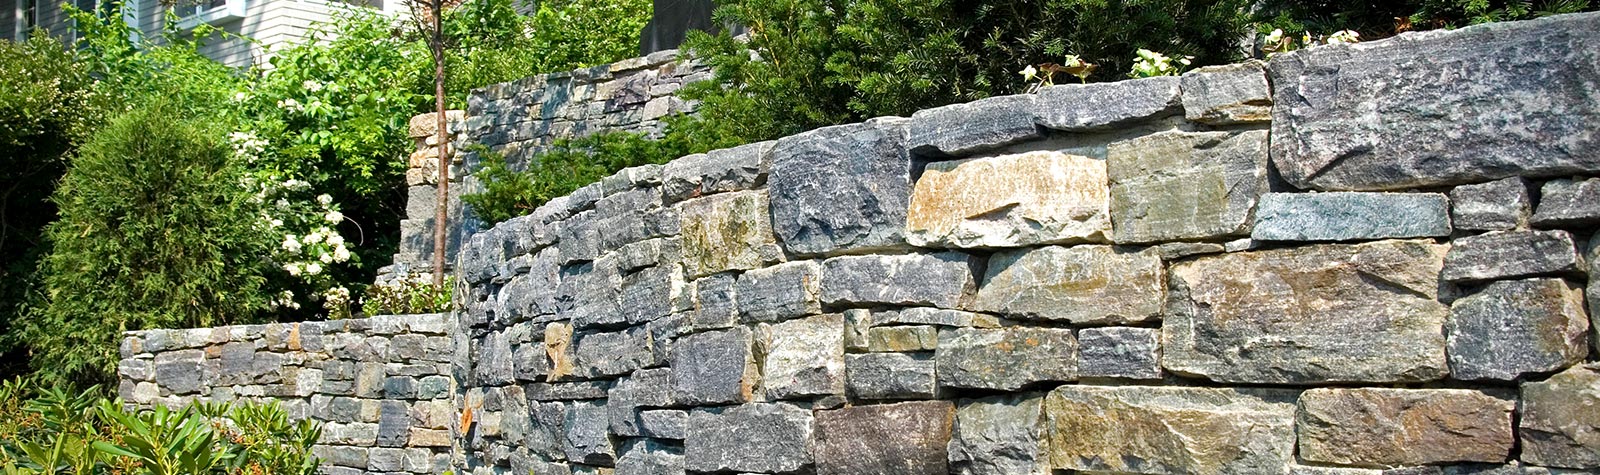 Garden Wall made from American Granite natural stone